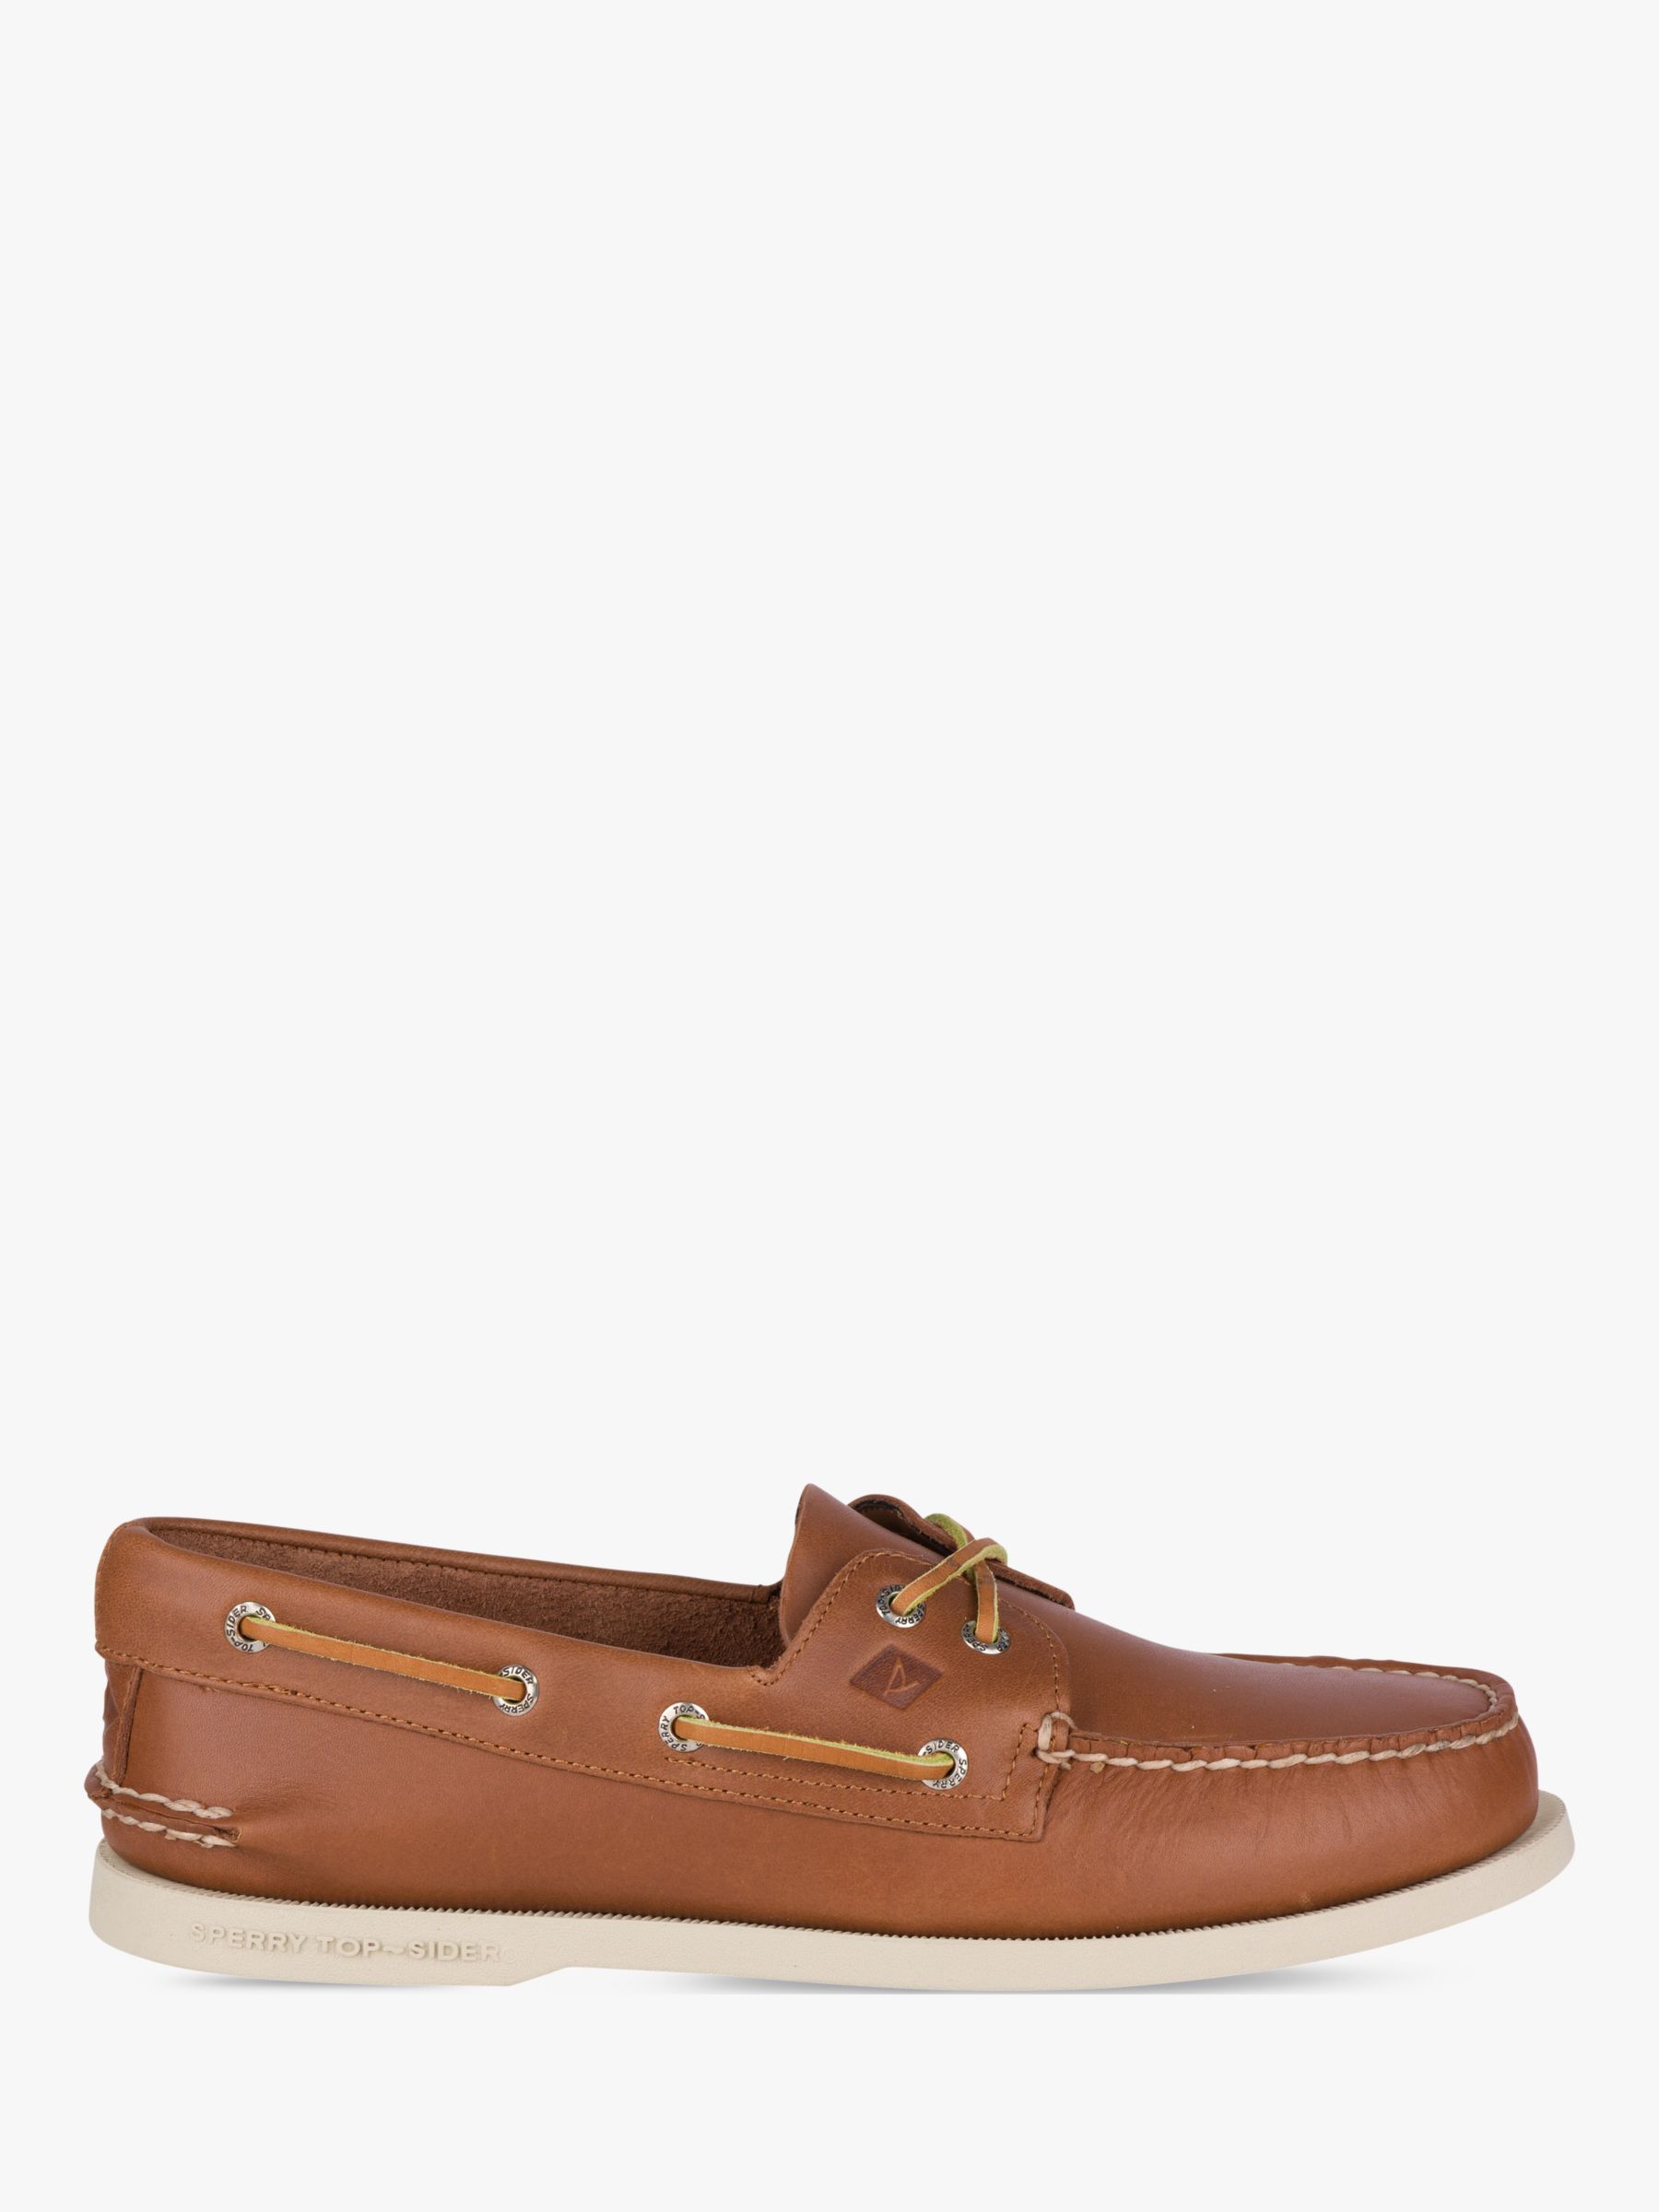 Sperry A/O Leather Boat Shoes, Tan at John Lewis & Partners